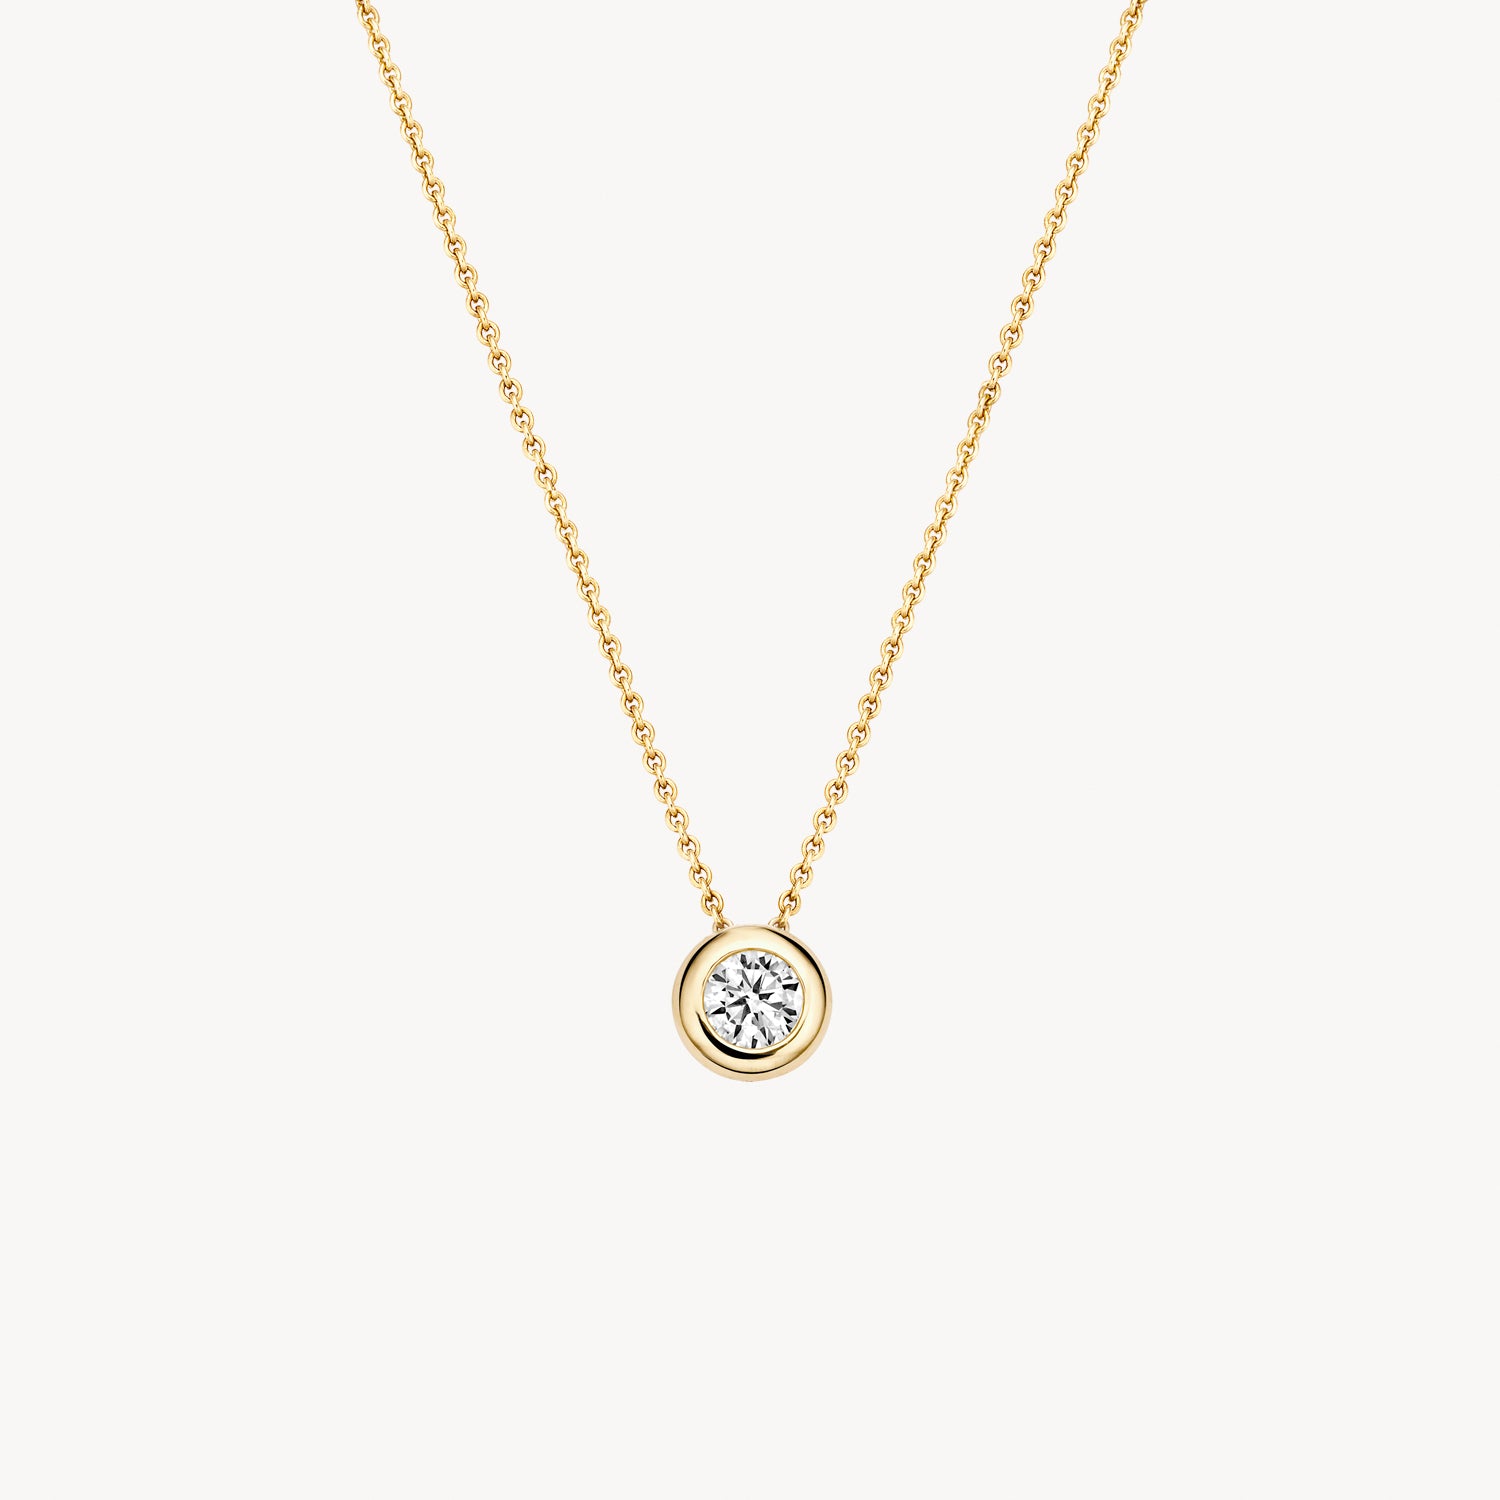 Necklace 3052YZI - 14k White and Yellowgold with zirconia